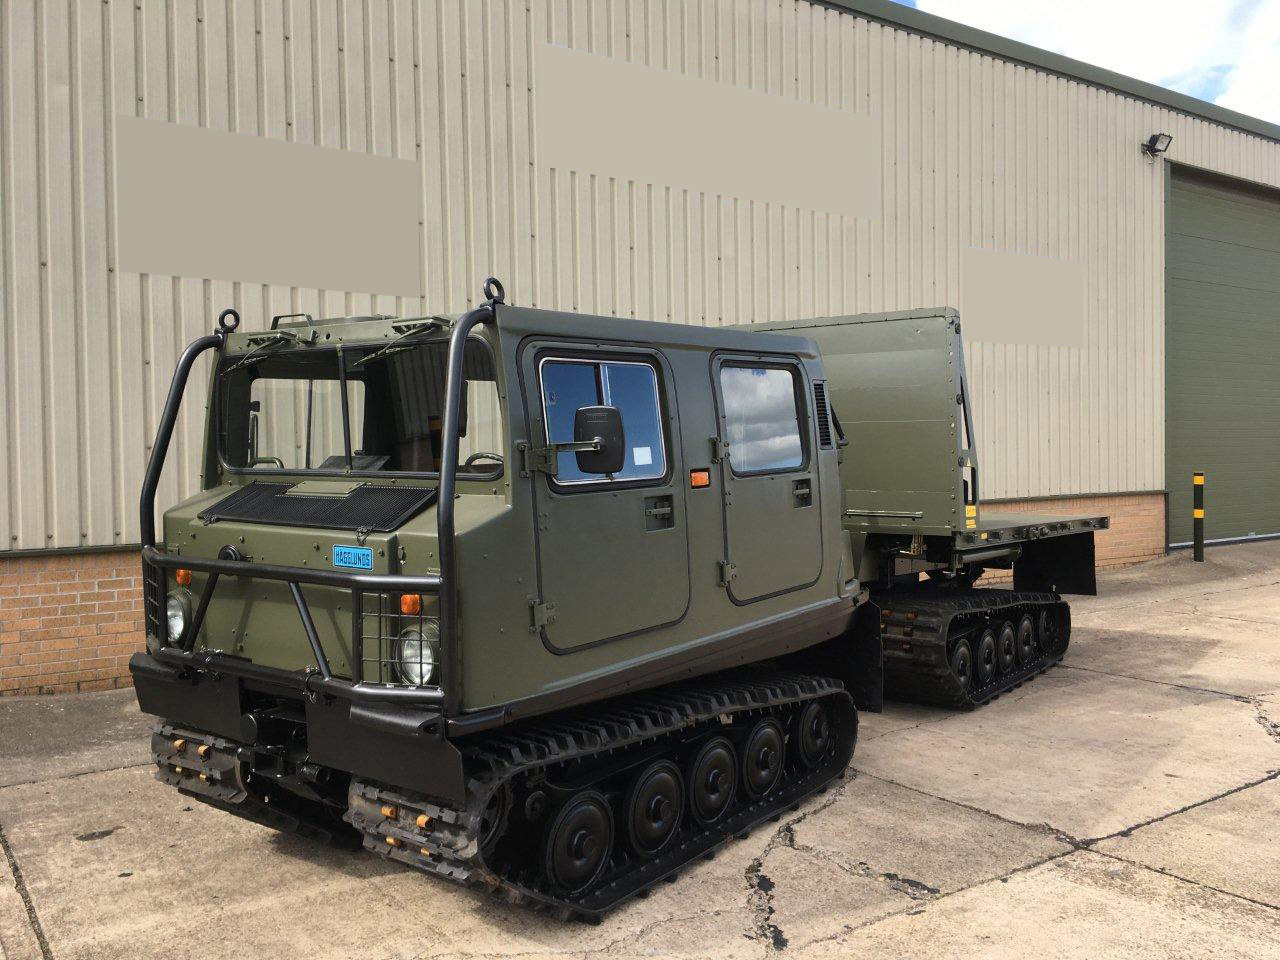 military vehicles for sale - Hagglunds Bv206 Load Carrier with Crane